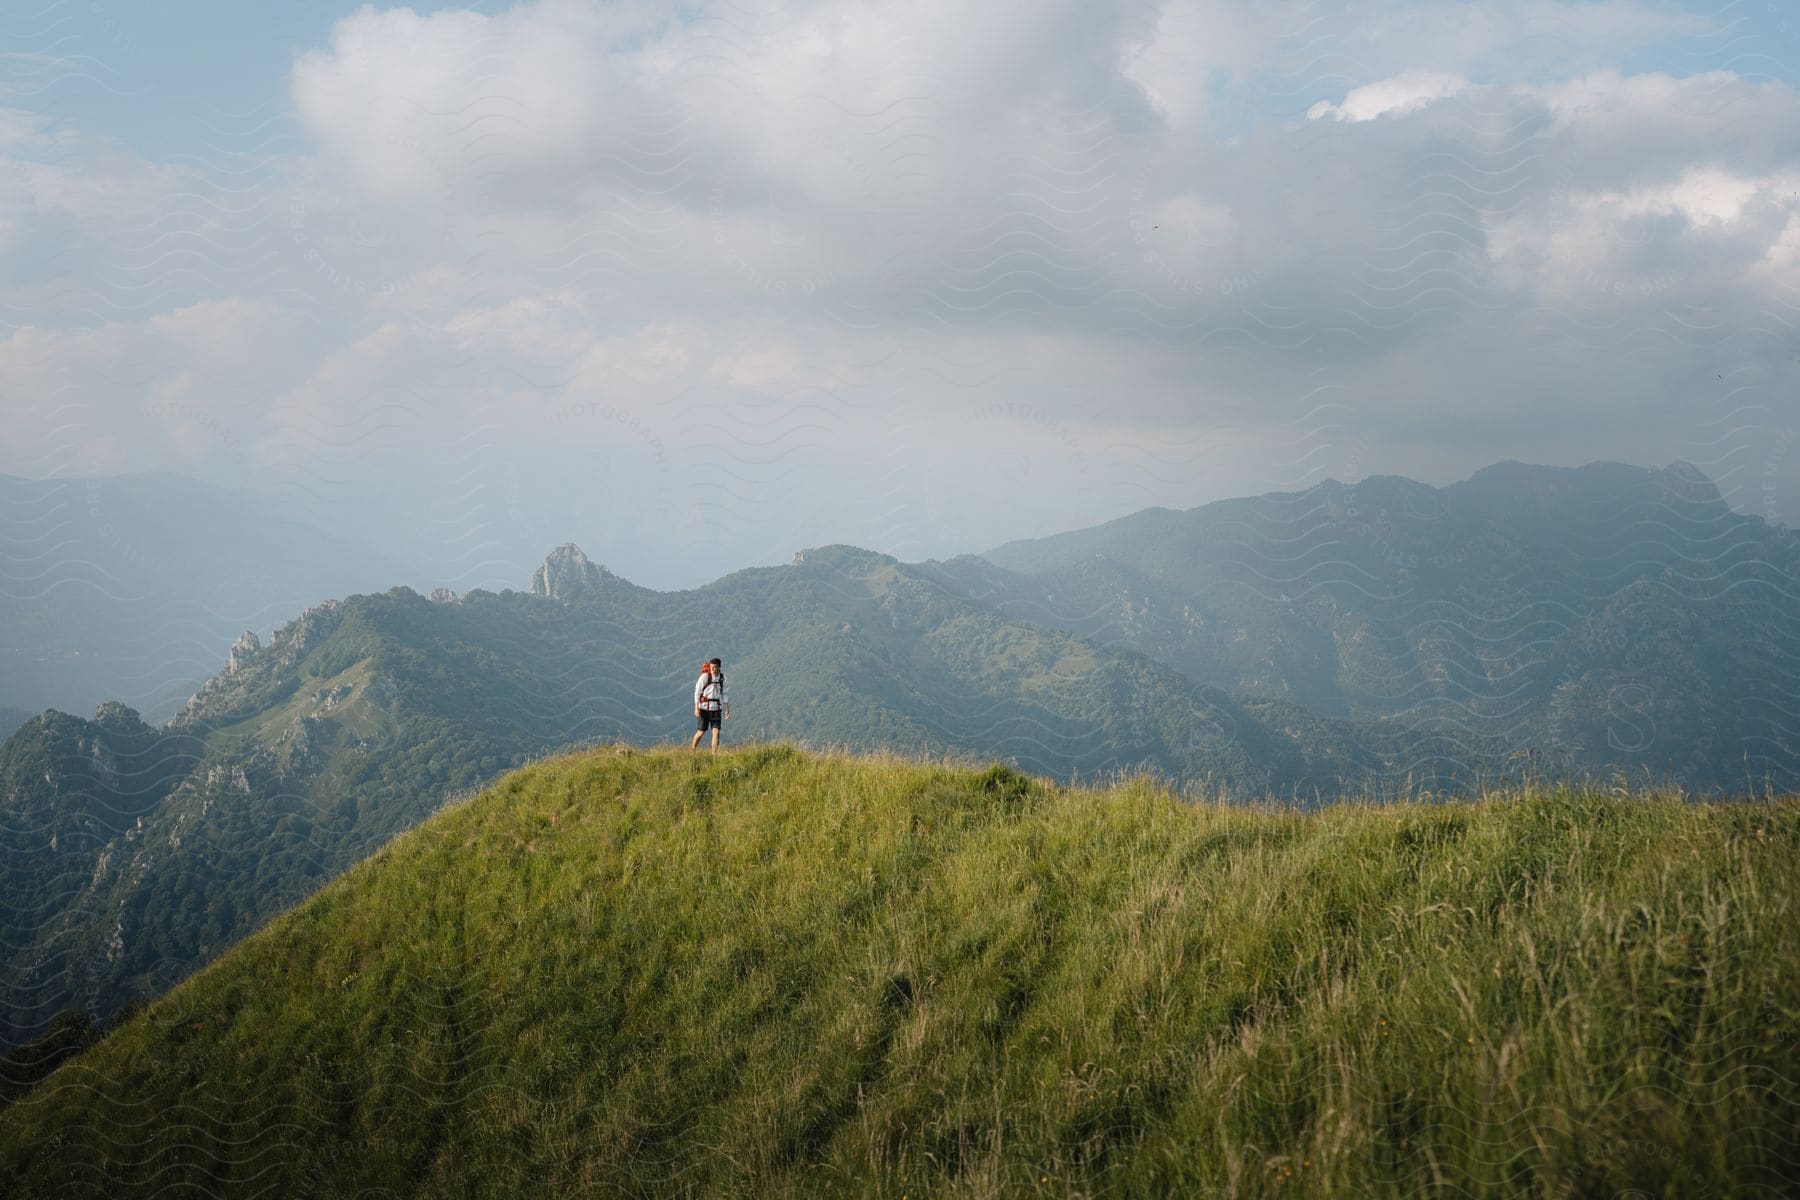 A man is walking on a grassy hill backpacking.